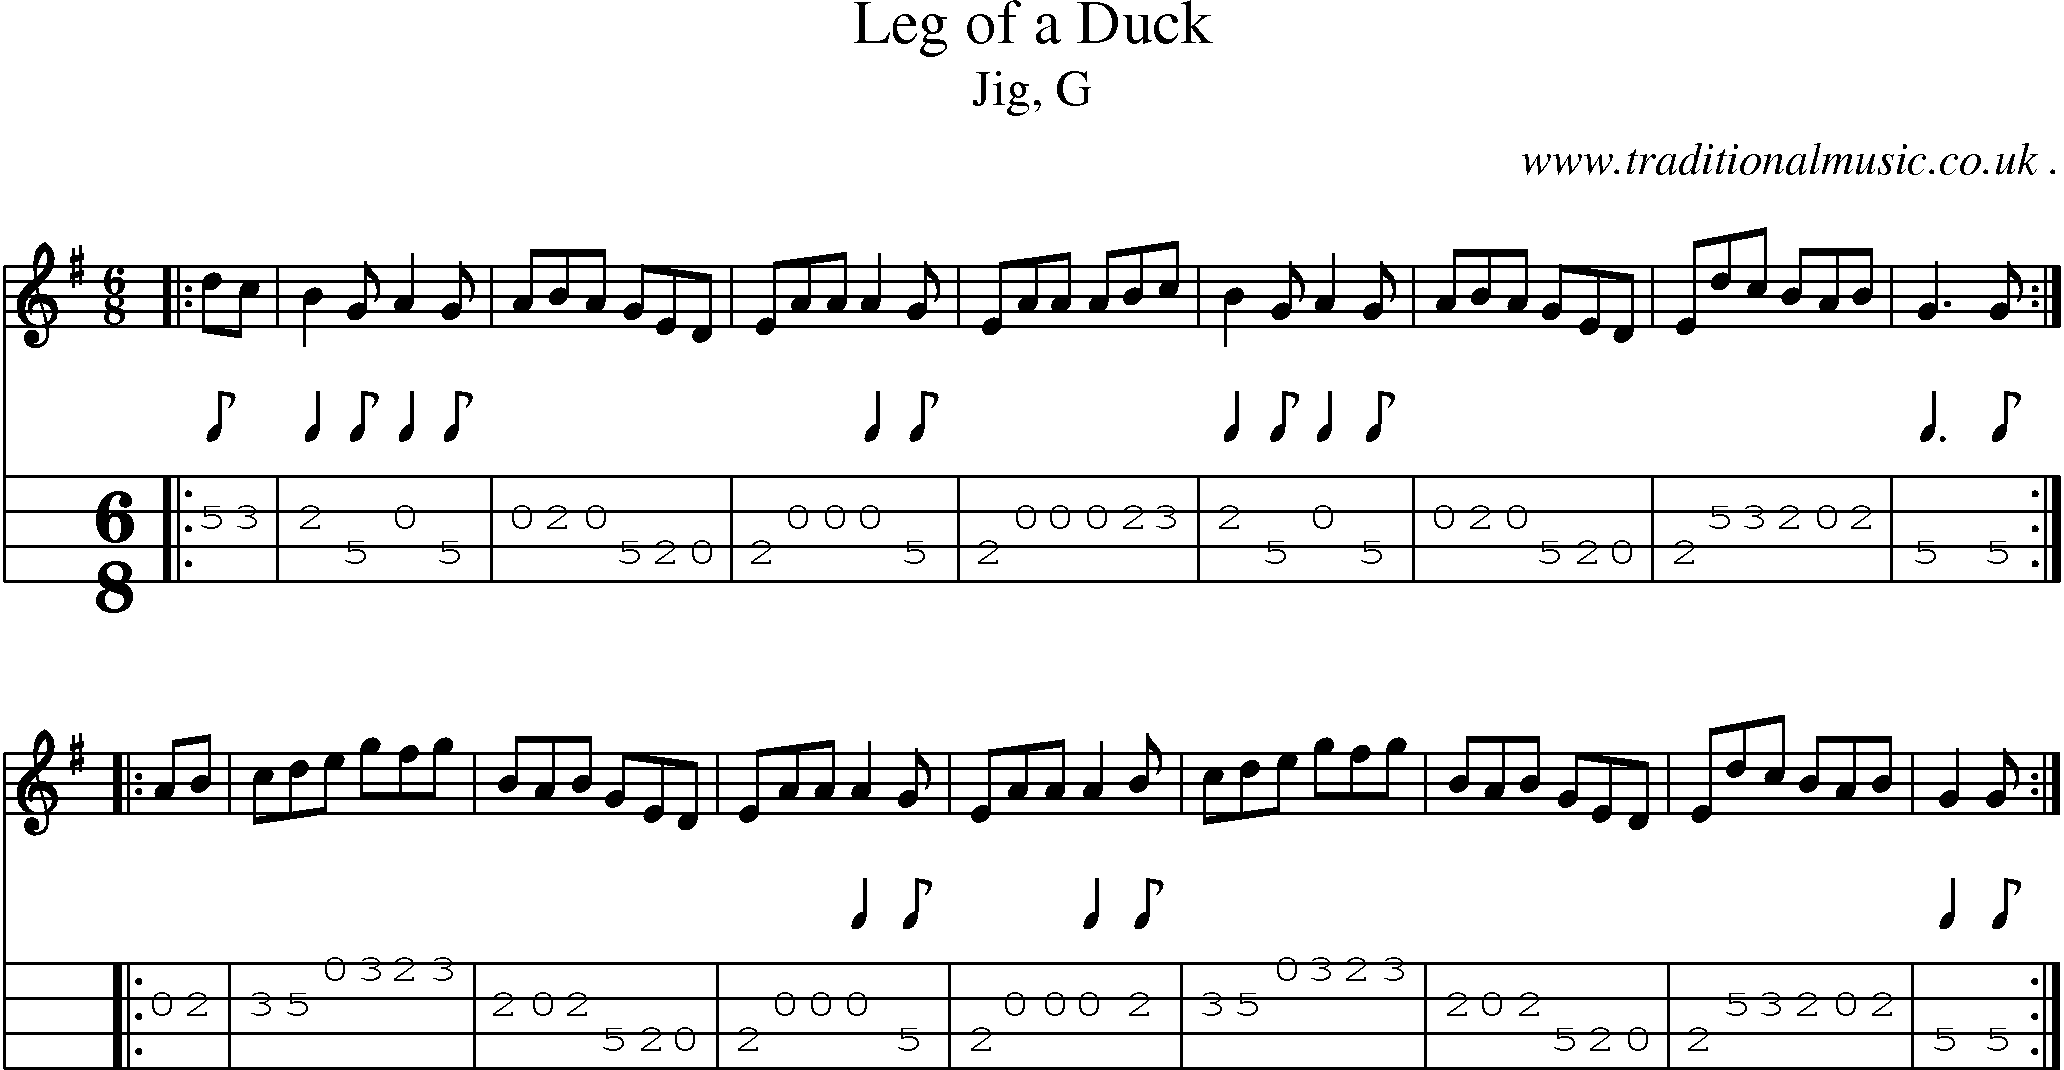 Sheet-music  score, Chords and Mandolin Tabs for Leg Of A Duck